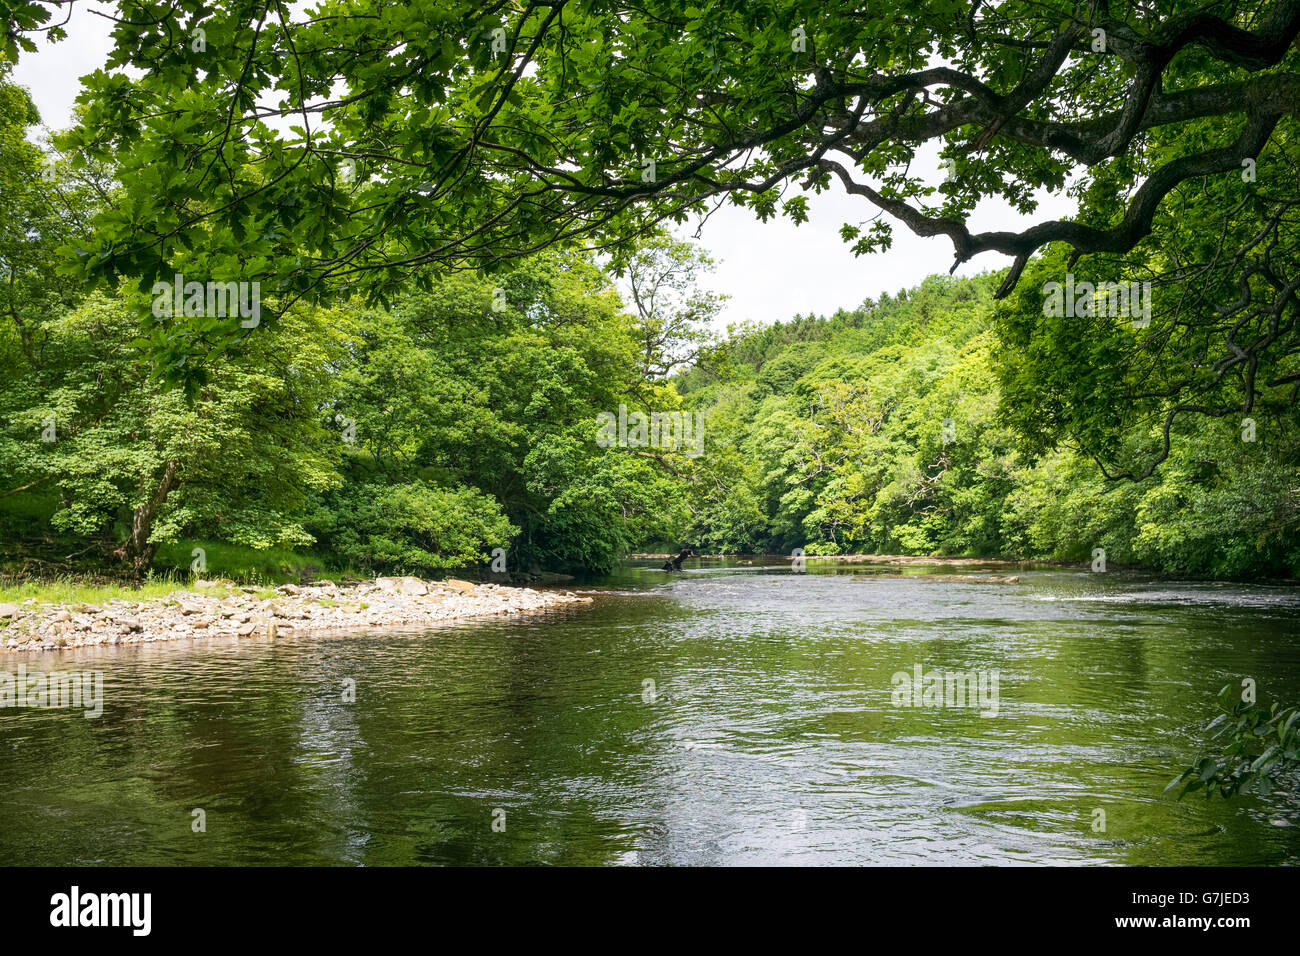 The tree-lined middle reaches of the River Tees, Barnard Castle, County Durham, England, UK Stock Photo